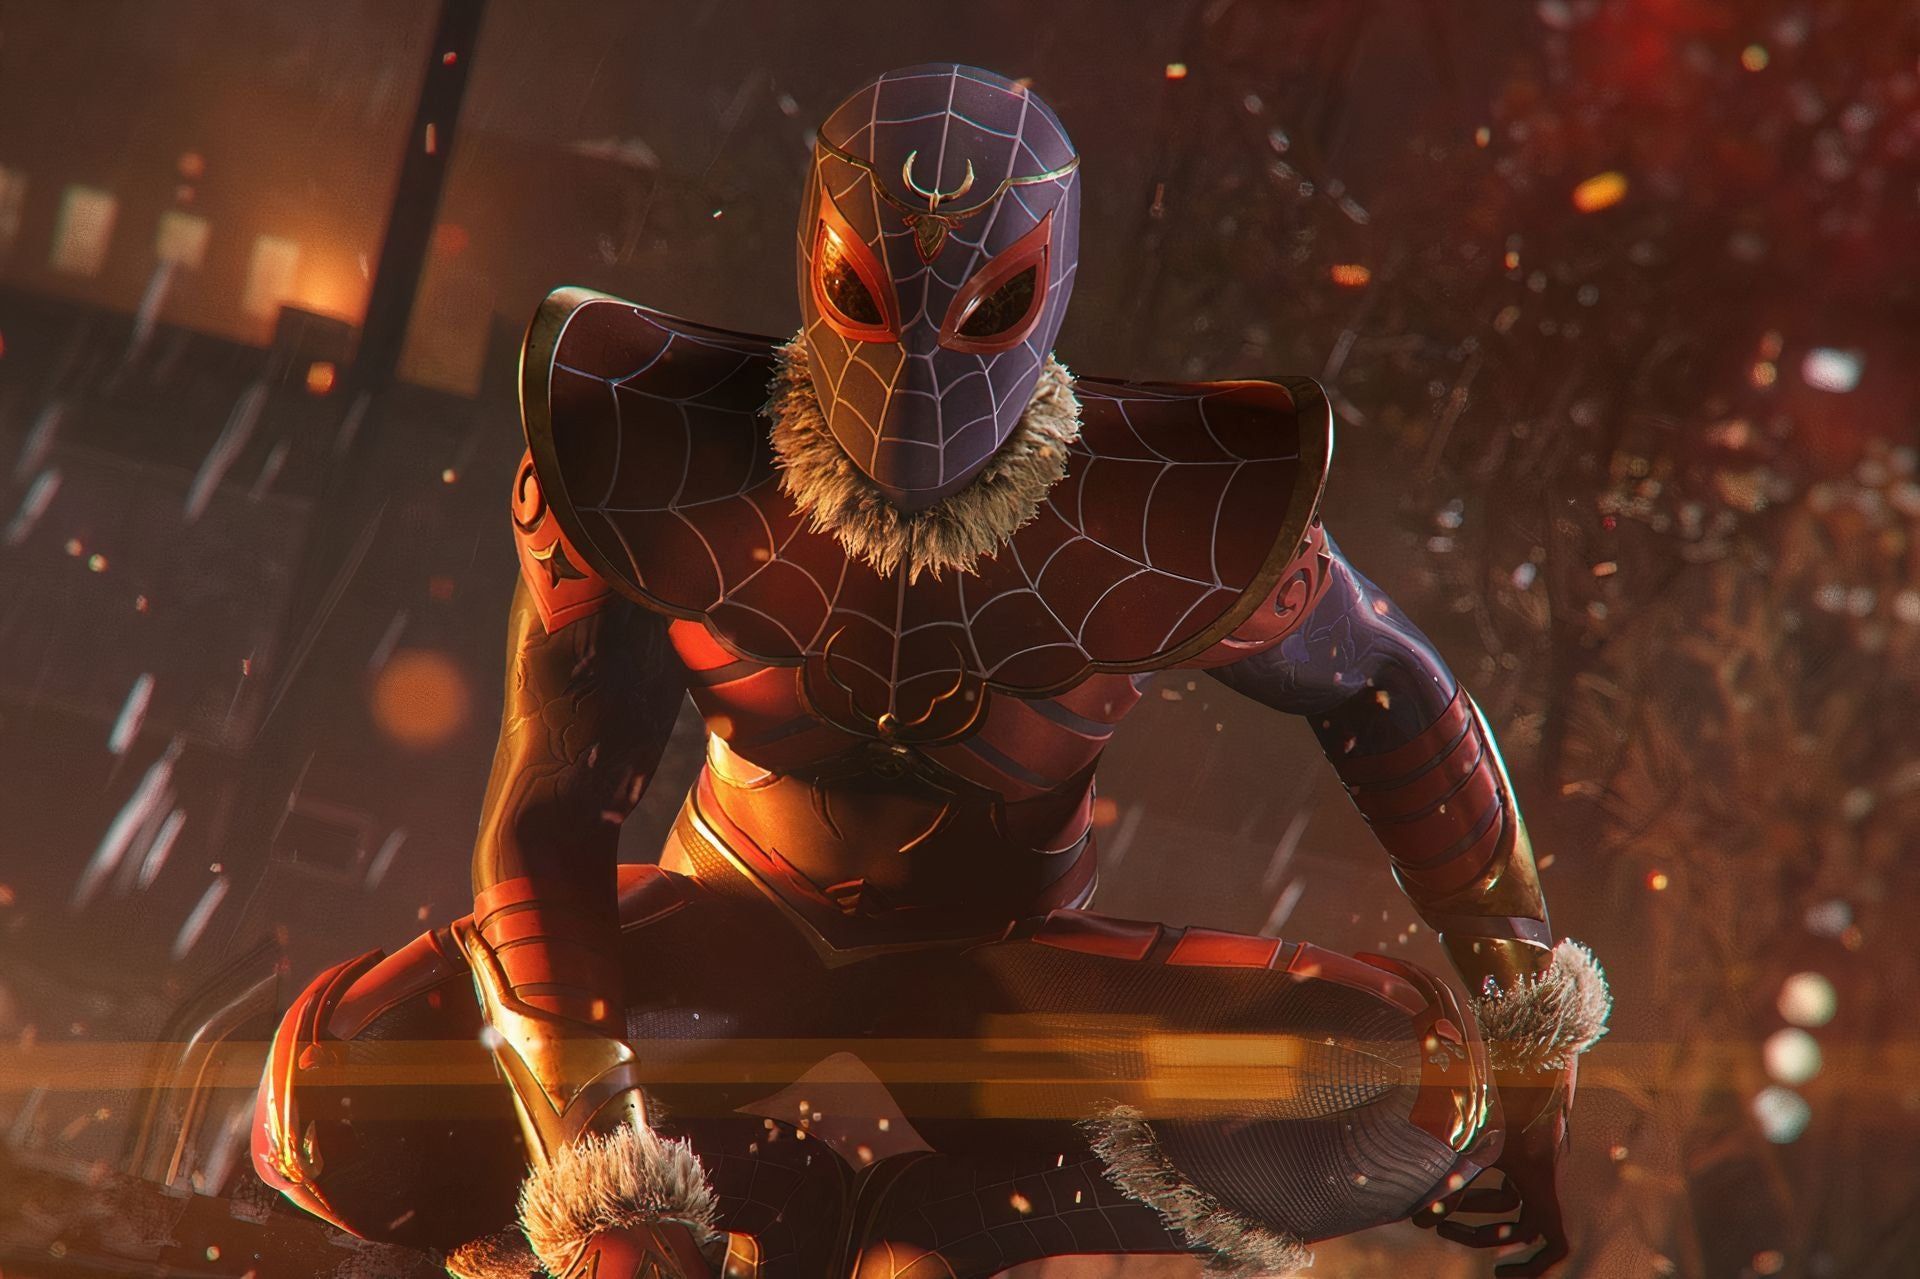 Why Marvel's Spider-Man 2 May or May Not Have Its Own DLC